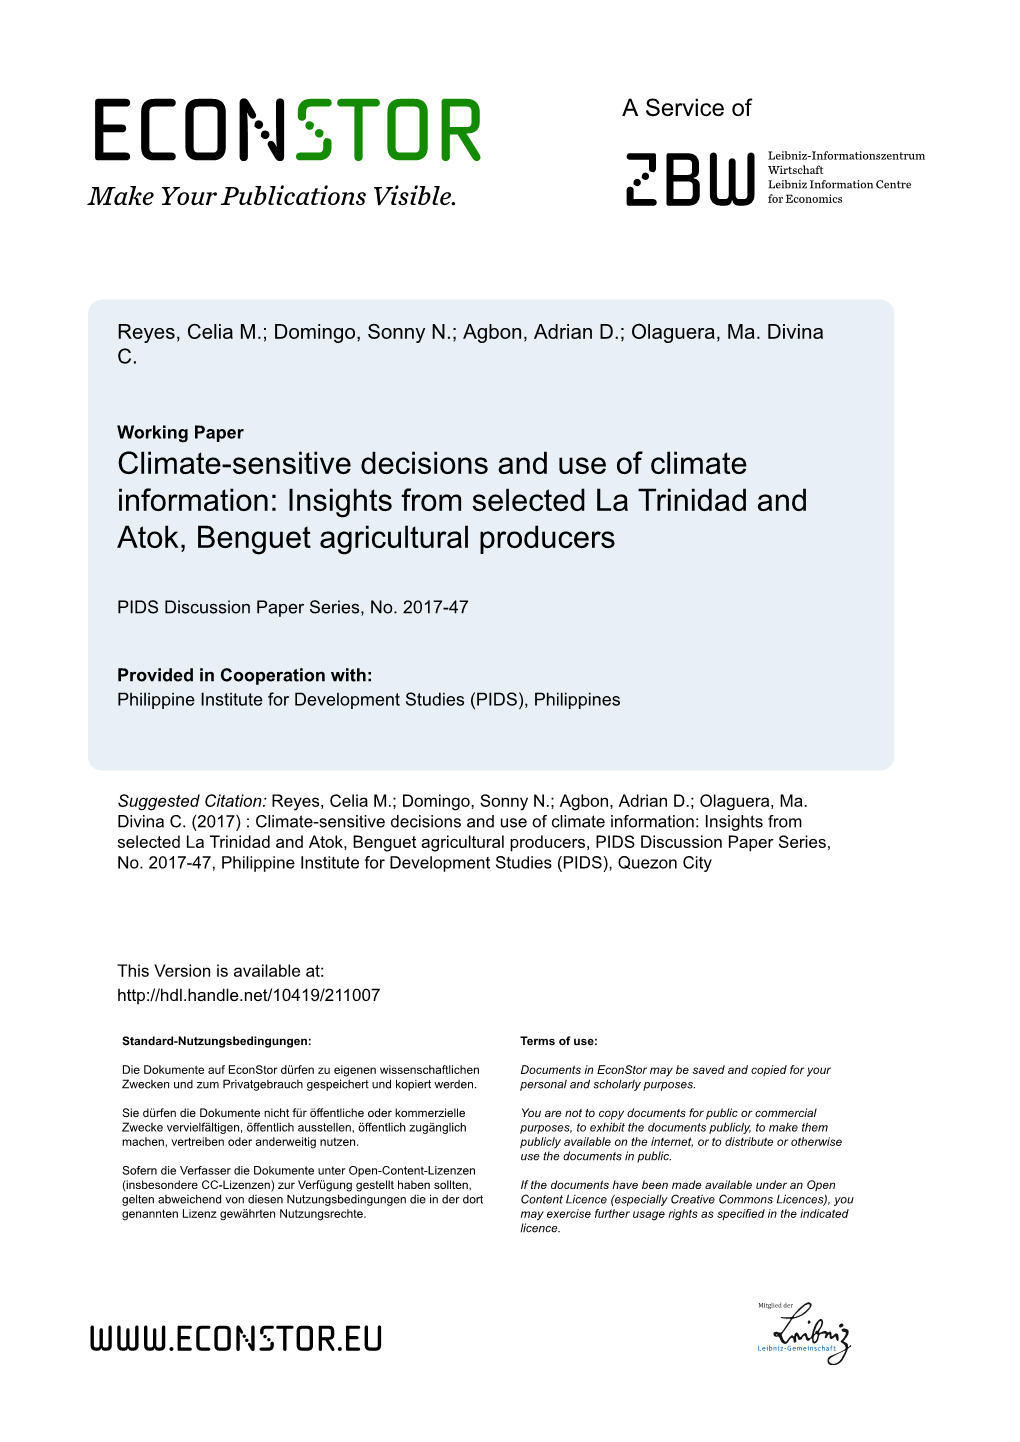 Insights from Selected La Trinidad and Atok, Benguet Agricultural Producers